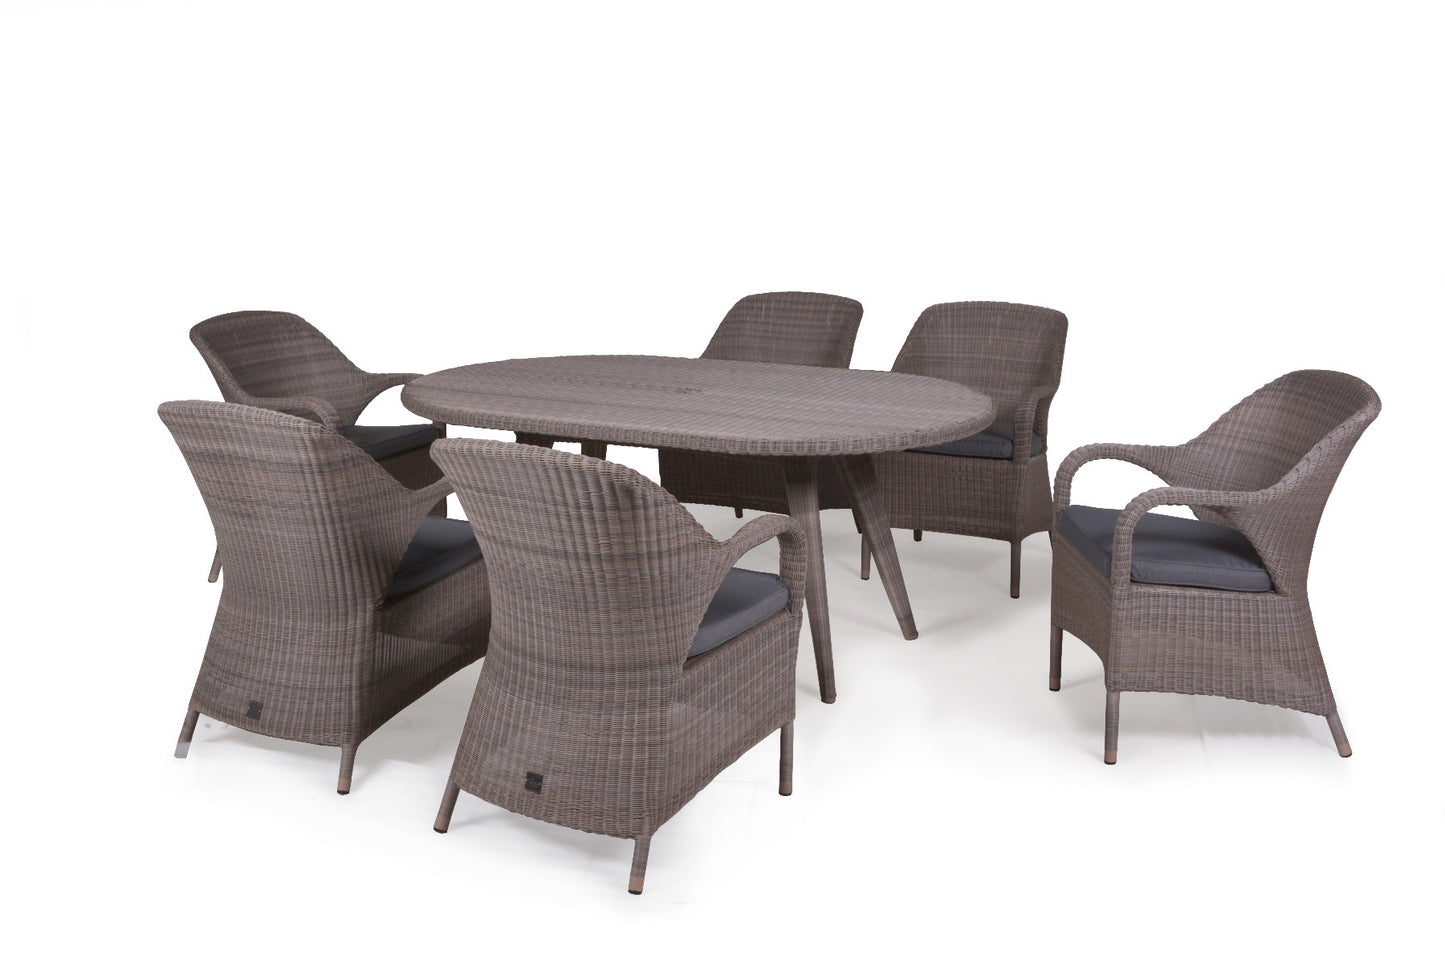 4 Seasons Outdoor Sussex 6 Seat Oval Dining Set